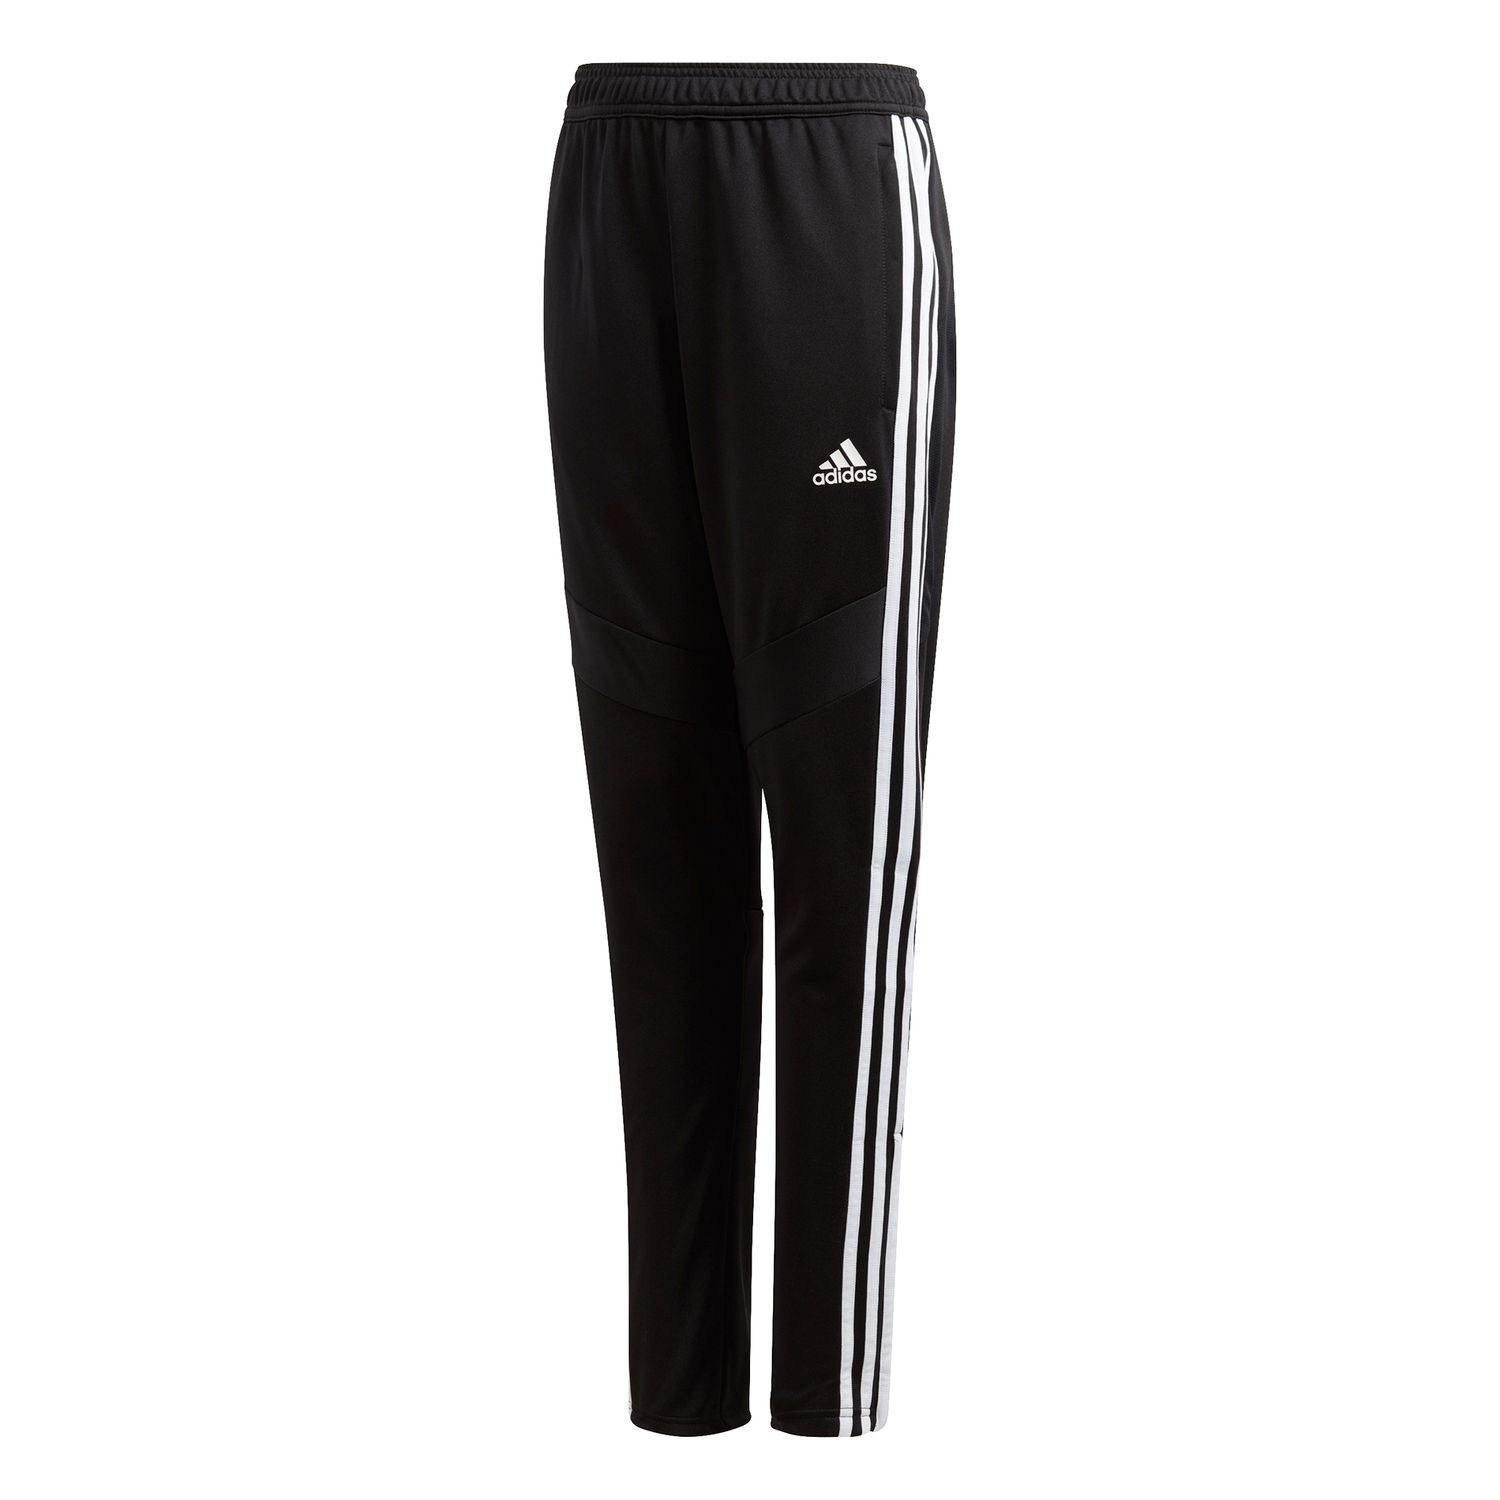 adidas pants with zipper at the bottom